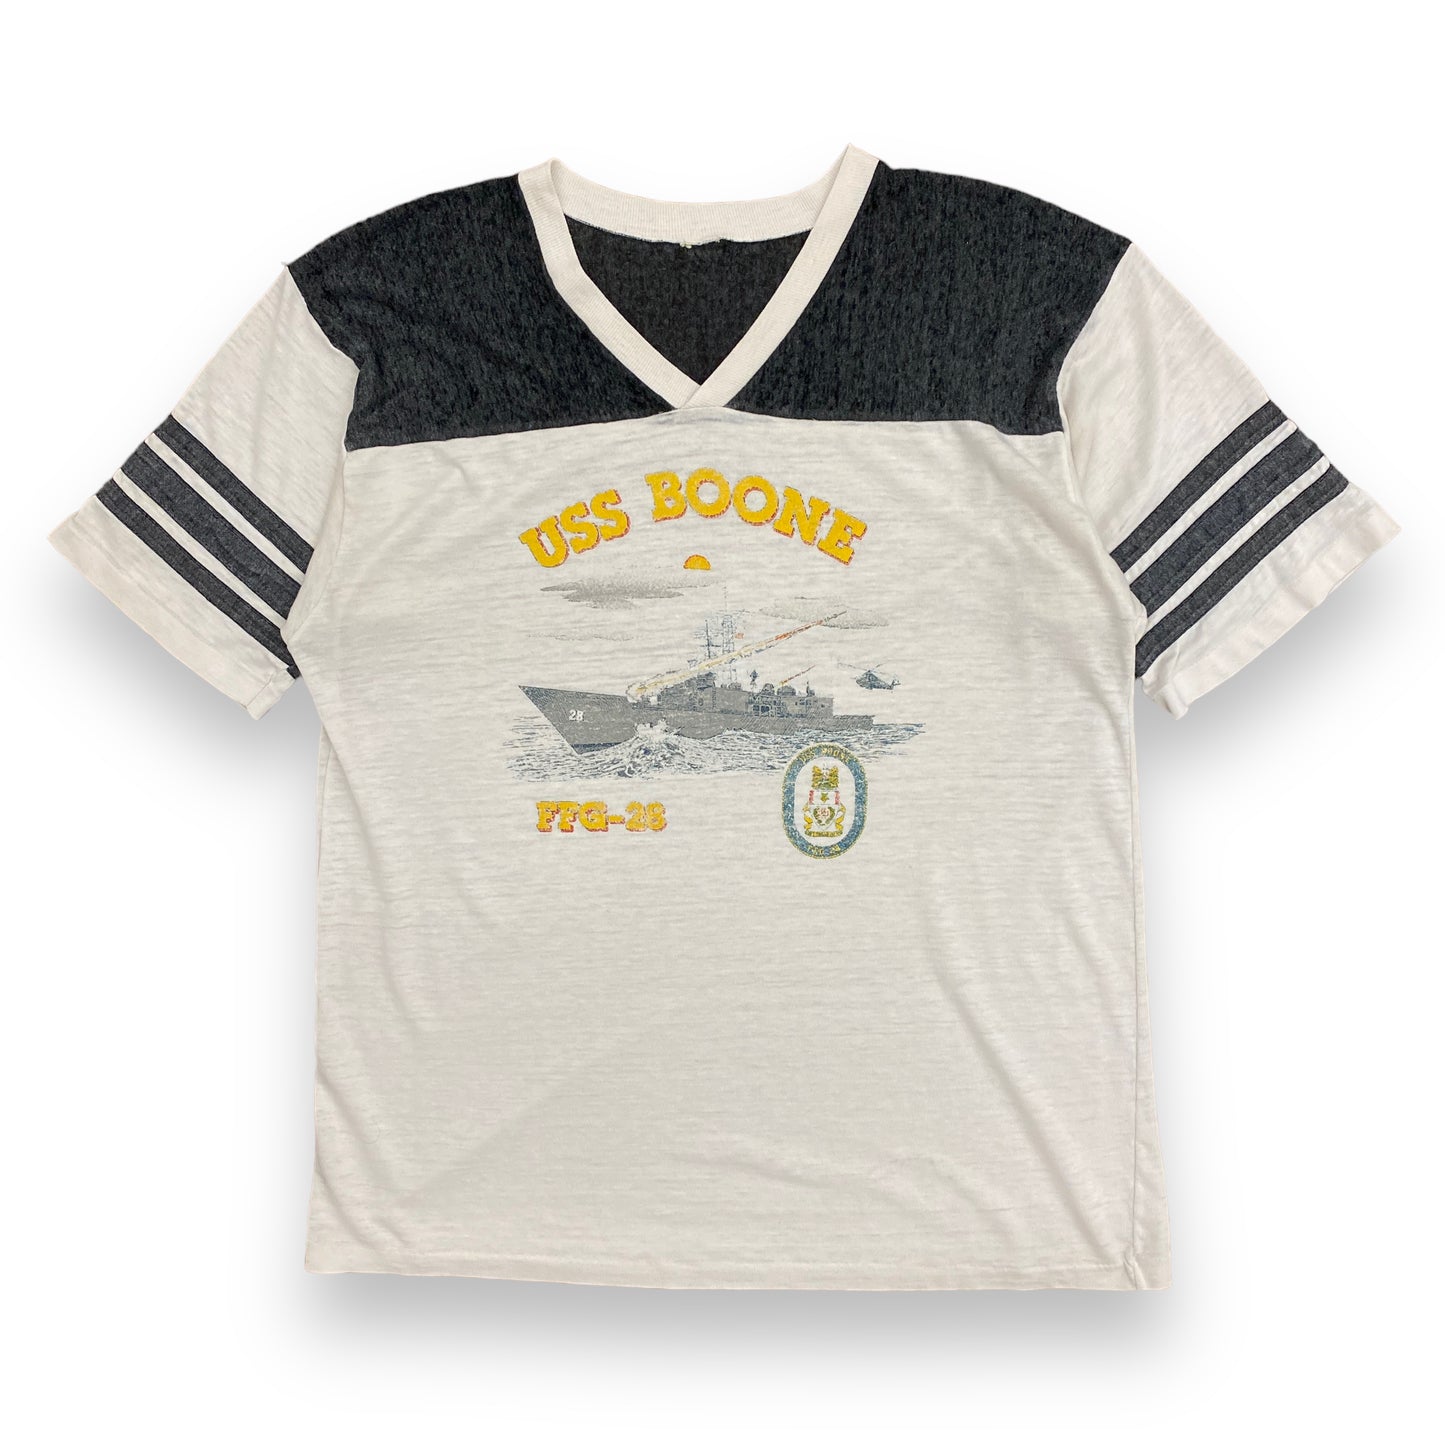 Vintage Early 1980s USS Boone Navy Ship Tee - Size XL